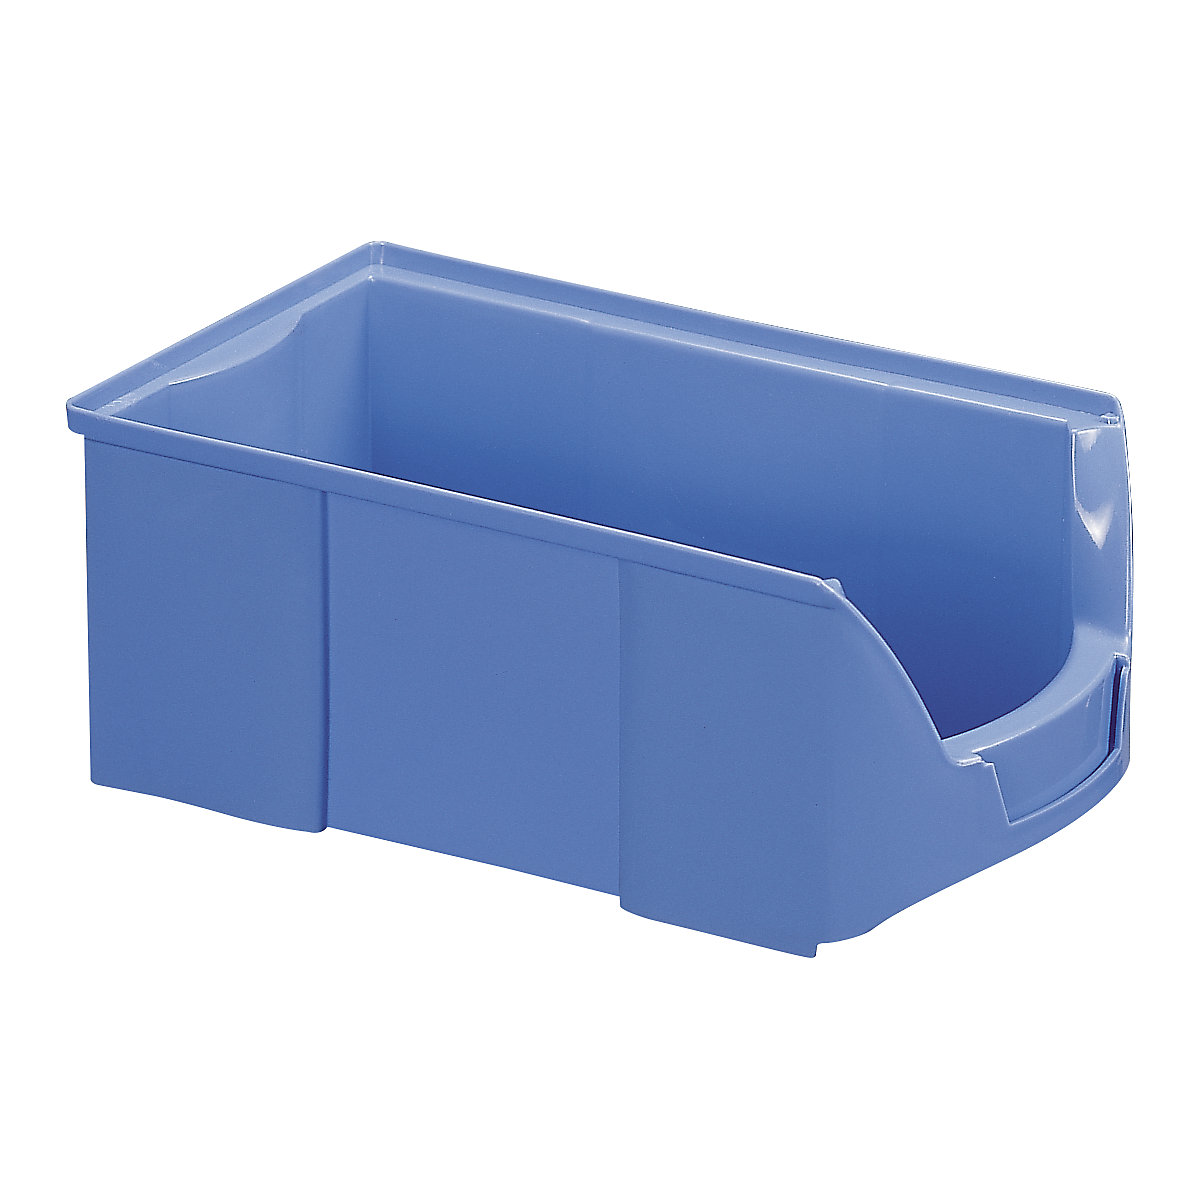 FUTURA open fronted storage bin made of polyethylene, LxWxH 510 x 310 x 201 mm, pack of 6, red-15